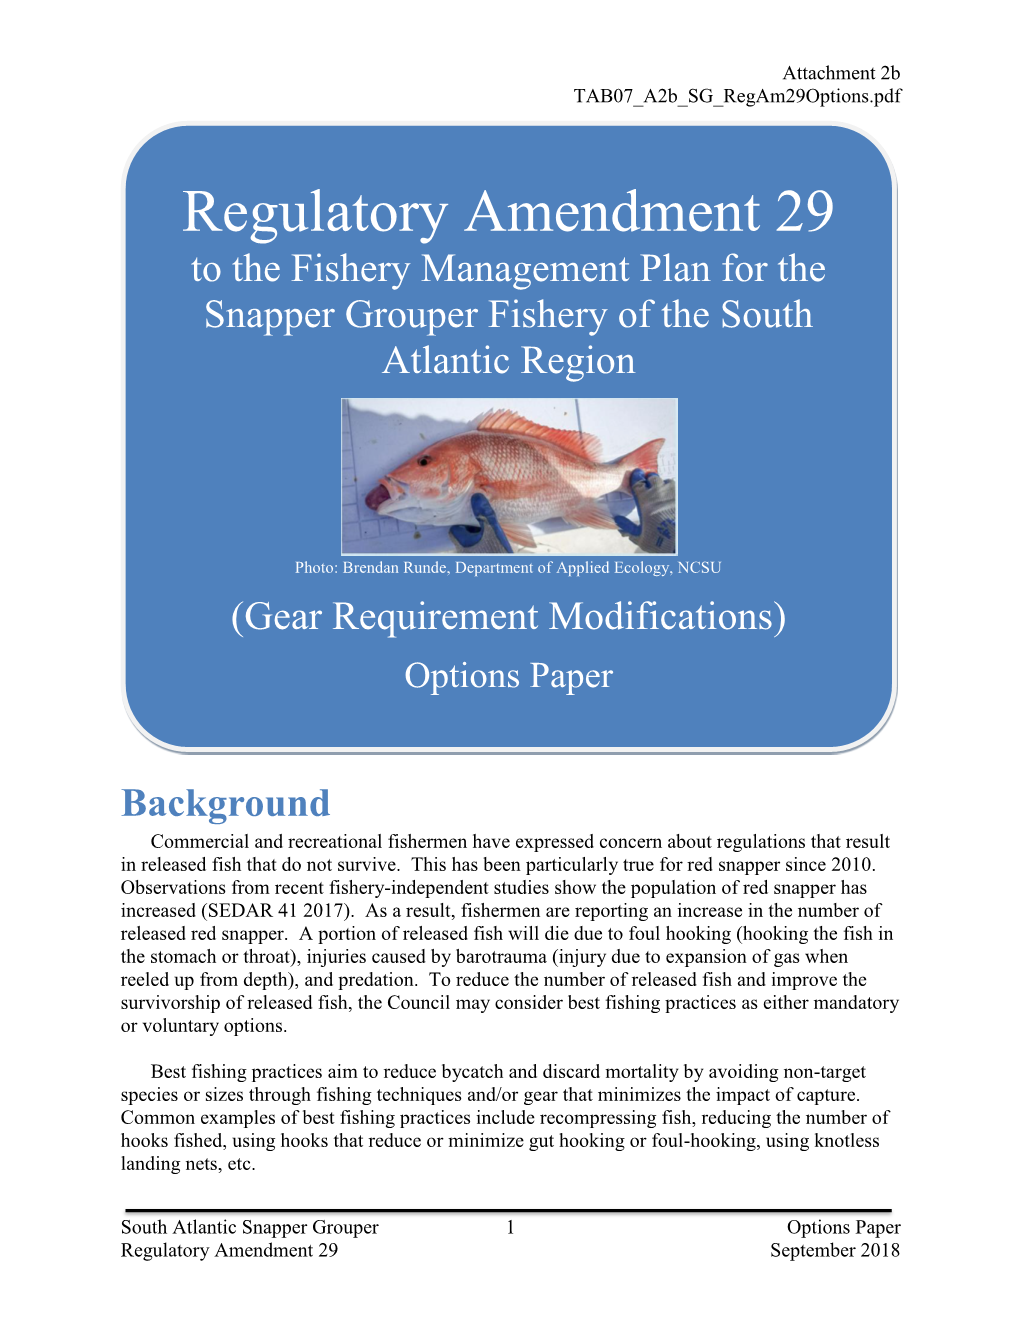 Regulatory Amendment 29 to the Fishery Management Plan for the Snapper Grouper Fishery of the South Atlantic Region